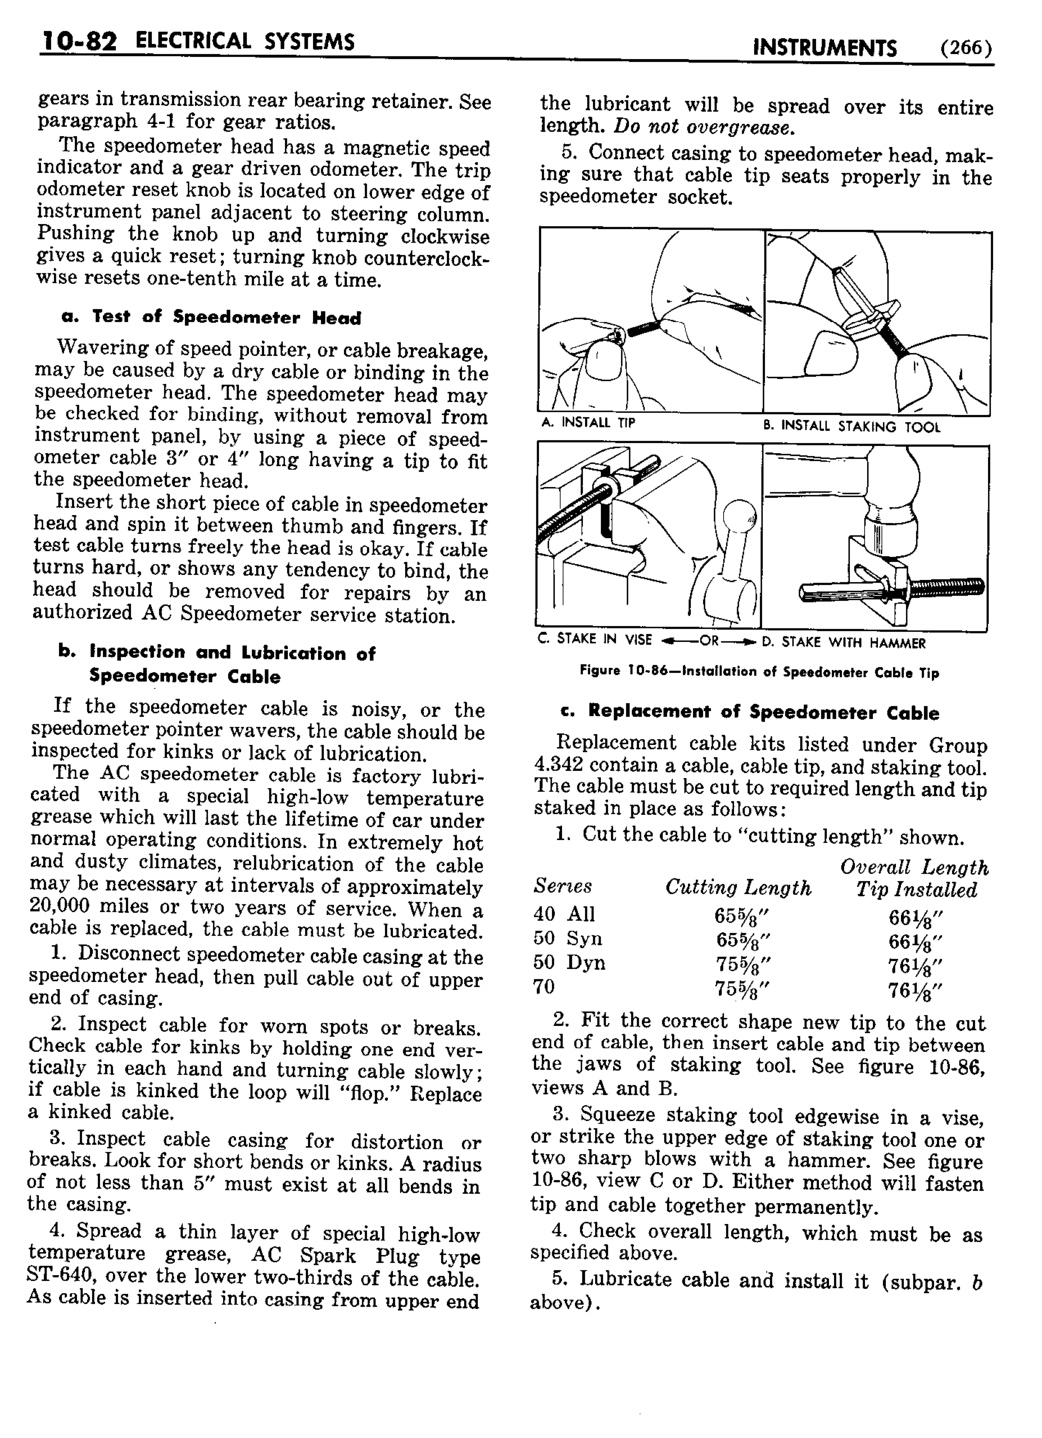 n_11 1953 Buick Shop Manual - Electrical Systems-083-083.jpg